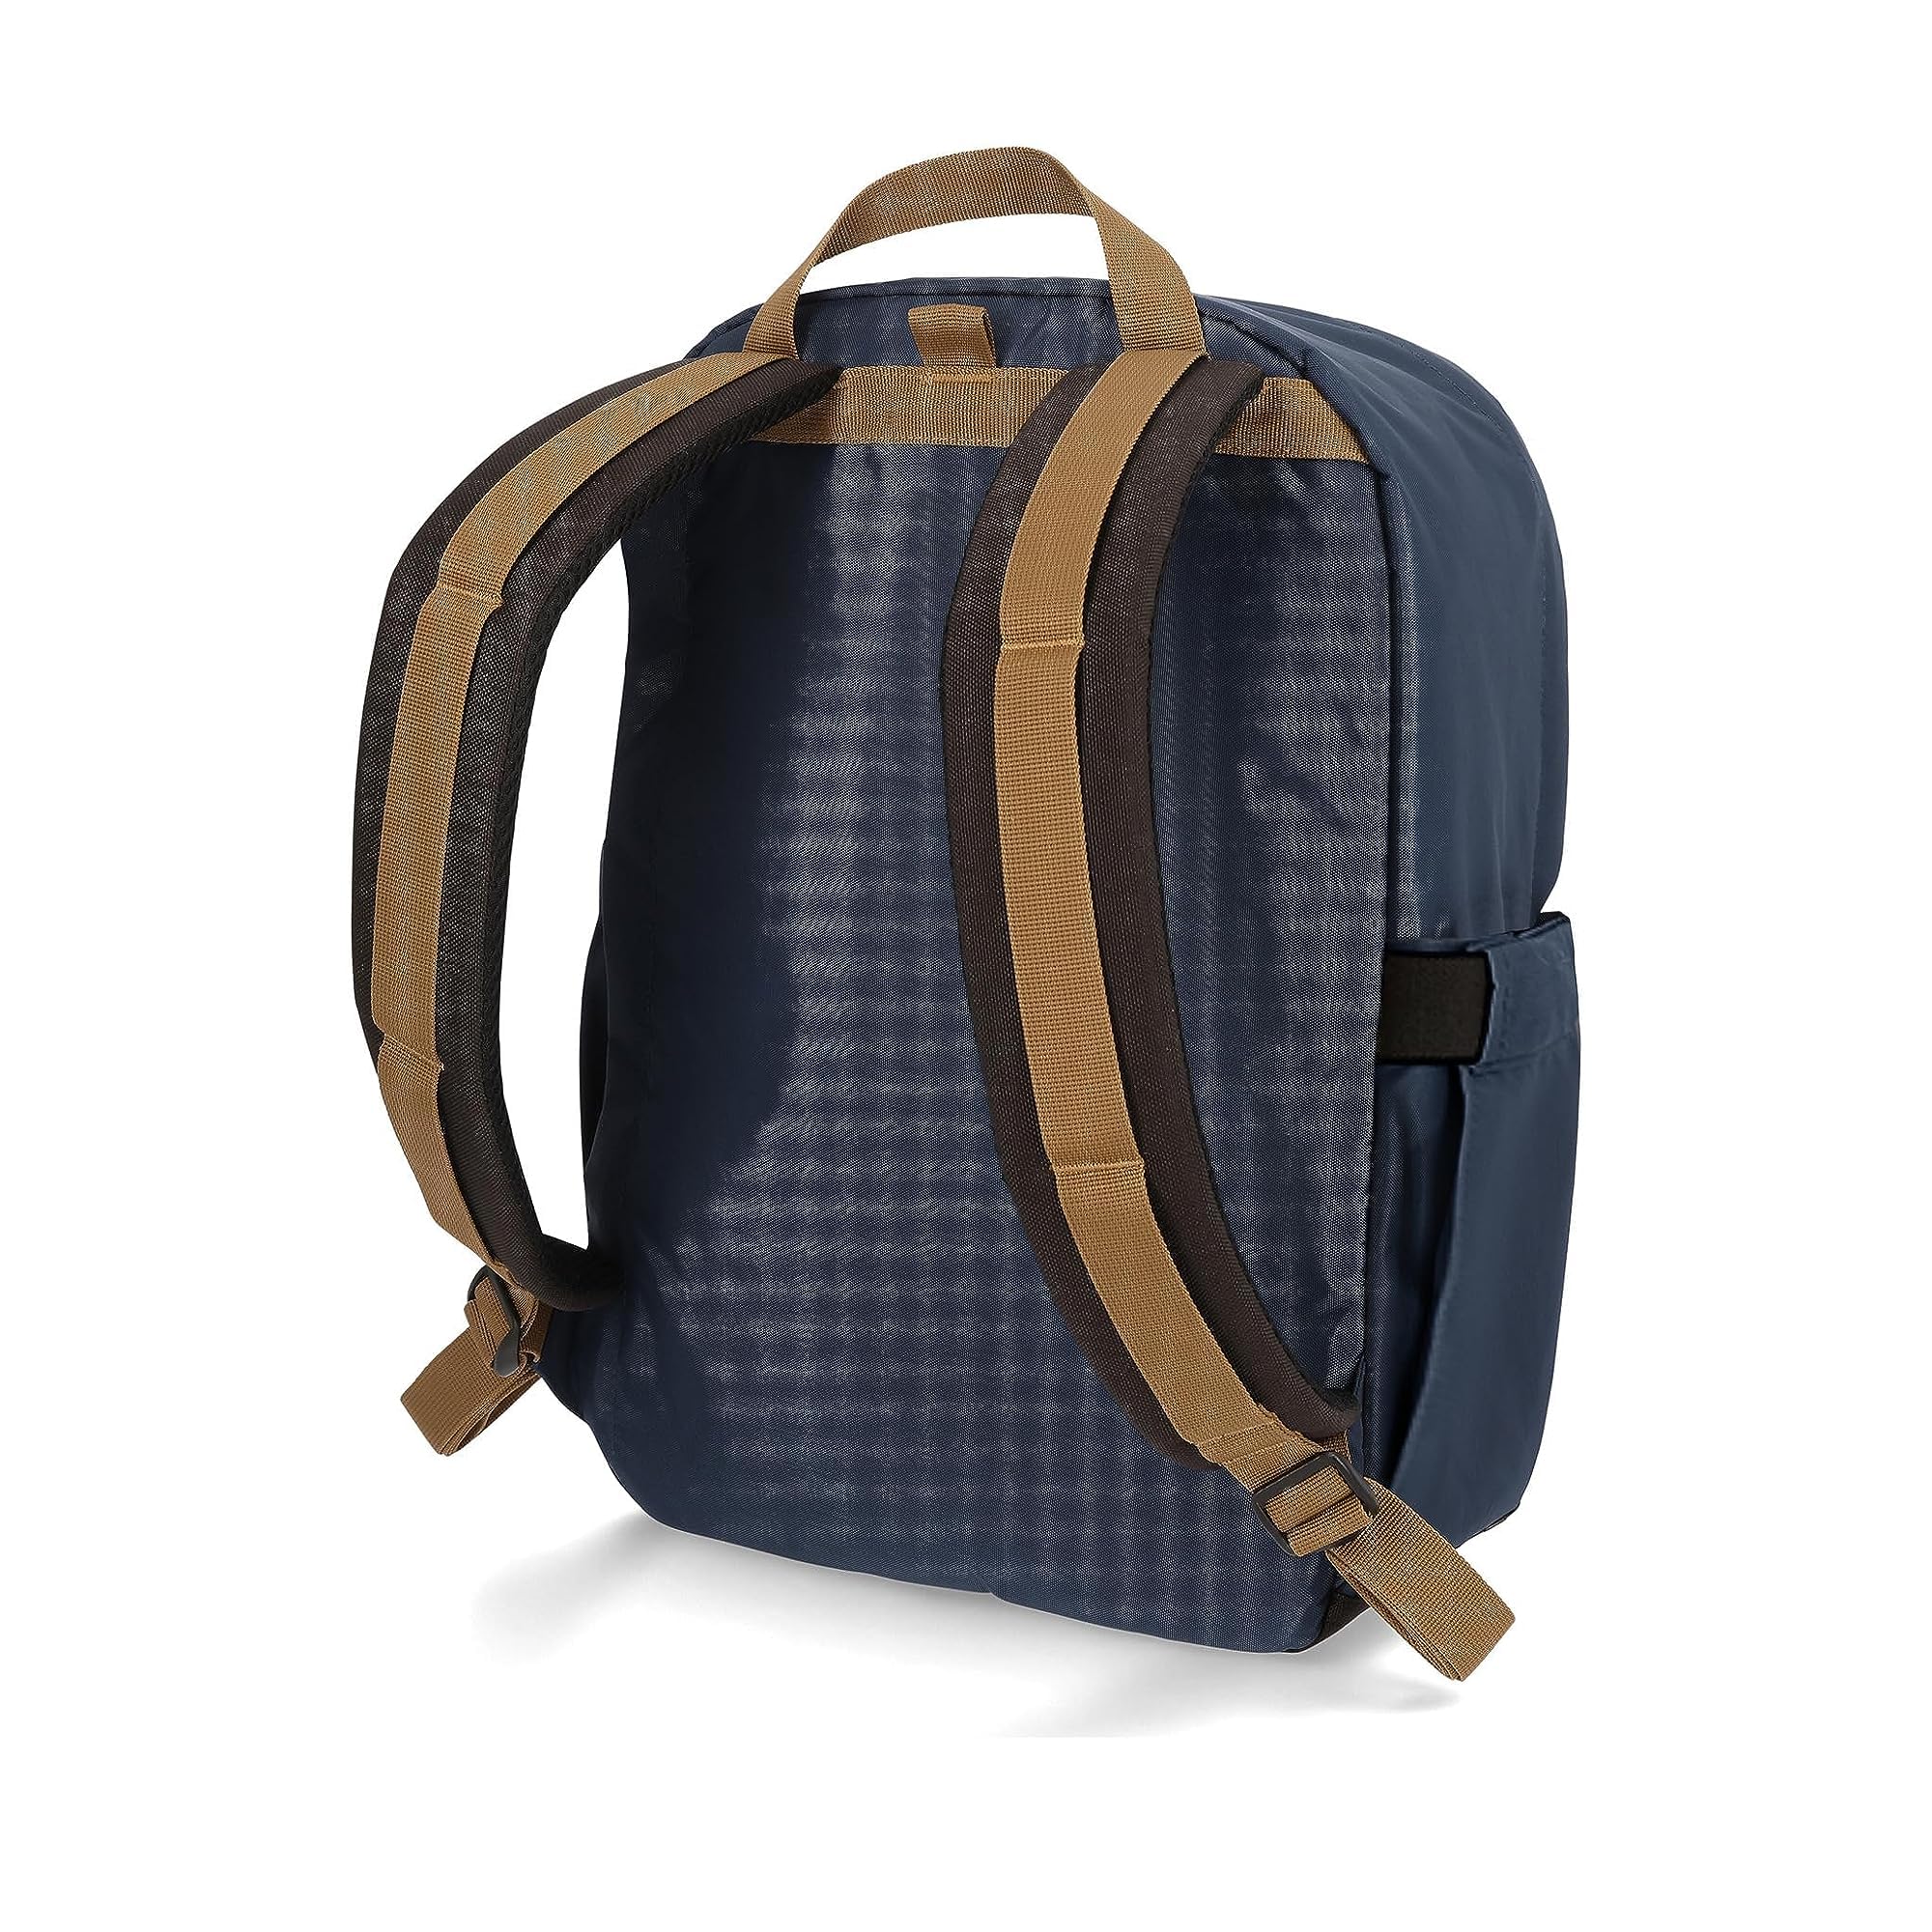 Topo Designs Session Pack - Olive/navy - One Size